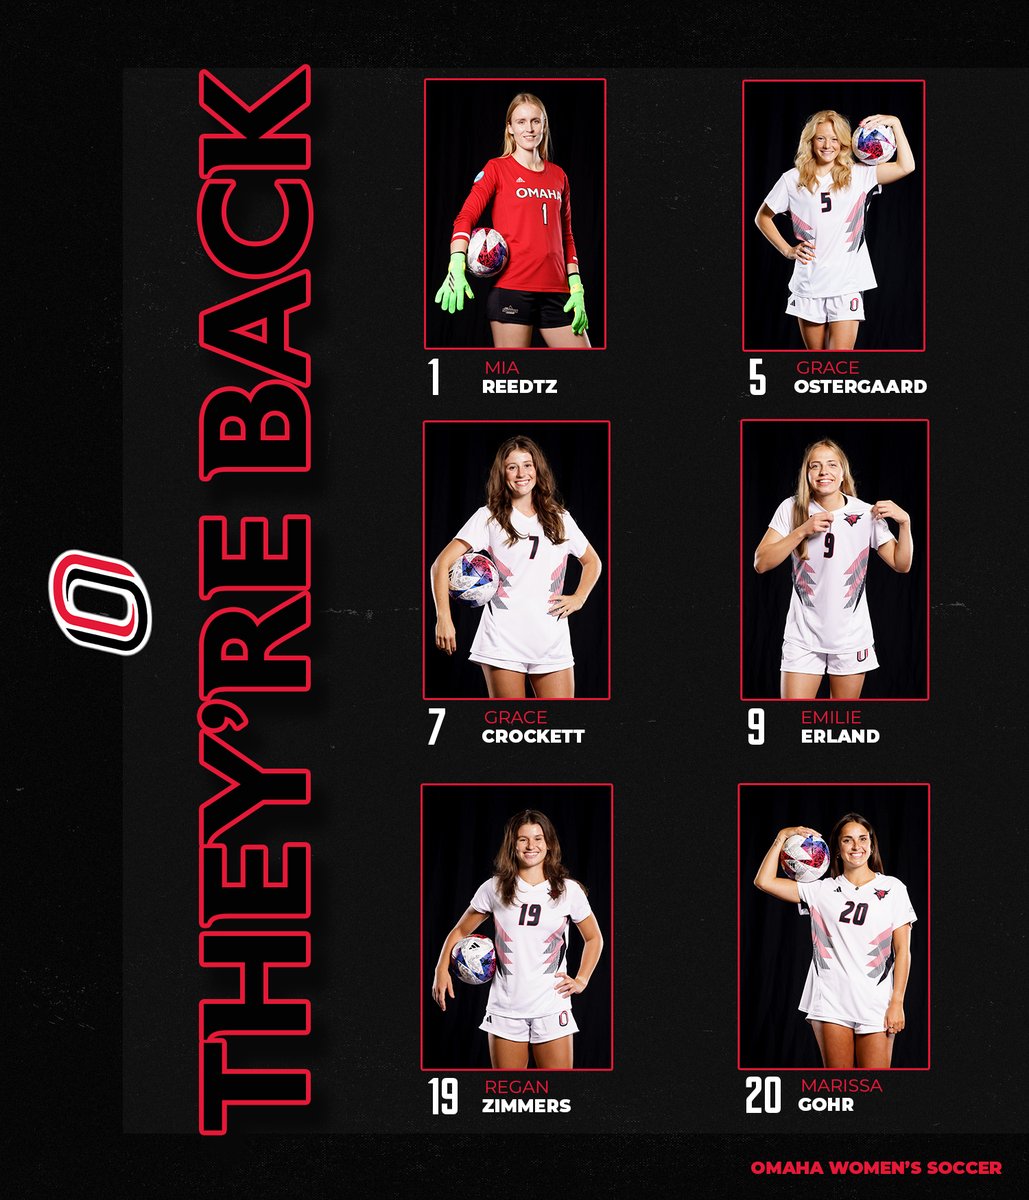 THEY'RE BAAAACK!! Mia Reedtz, Grace Ostergaard, Grace Crockett, Emilie Erland, Regan Zimmers and Marissa Gohr will all return next season to put on the Maverick kit! This sensational six has combined for 399 games played, 341 games started, 22 goals and 42 assists. #OmahaWSOC